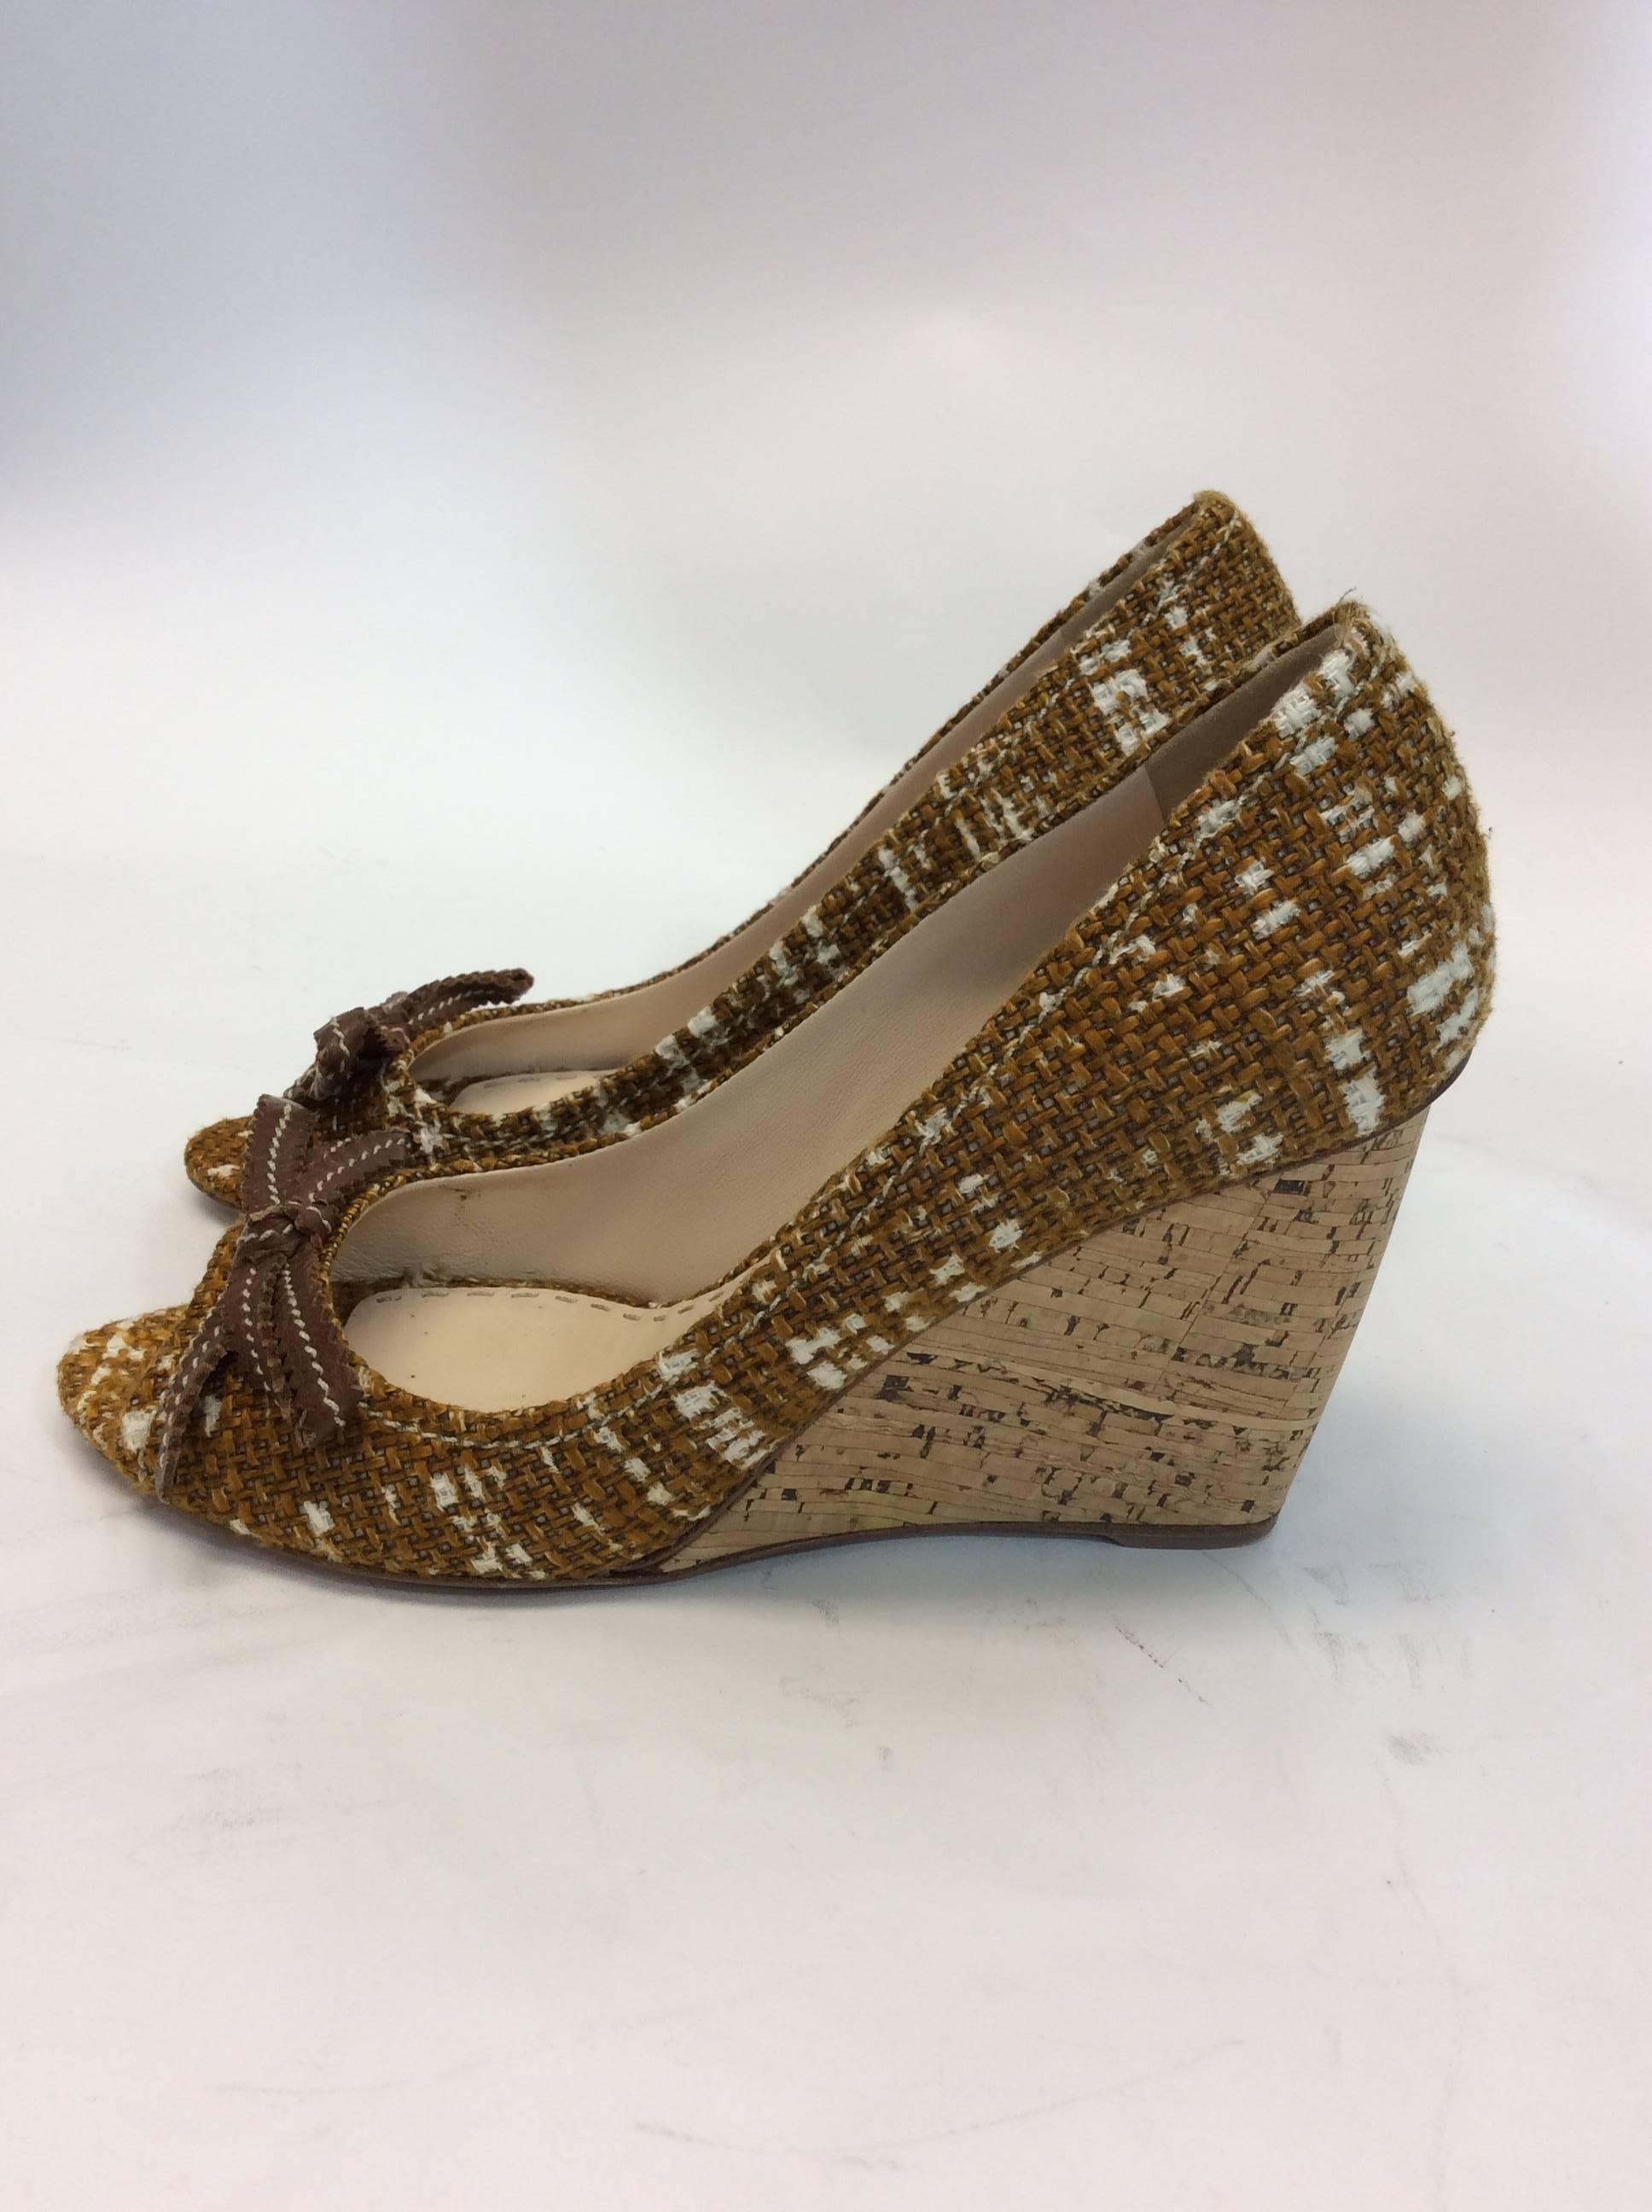 Prada Tweed Peep Toe Wedge
4 inch cork wedge
Tweed material, features leather brown bow on toe
Comes with box
Made in Italy
